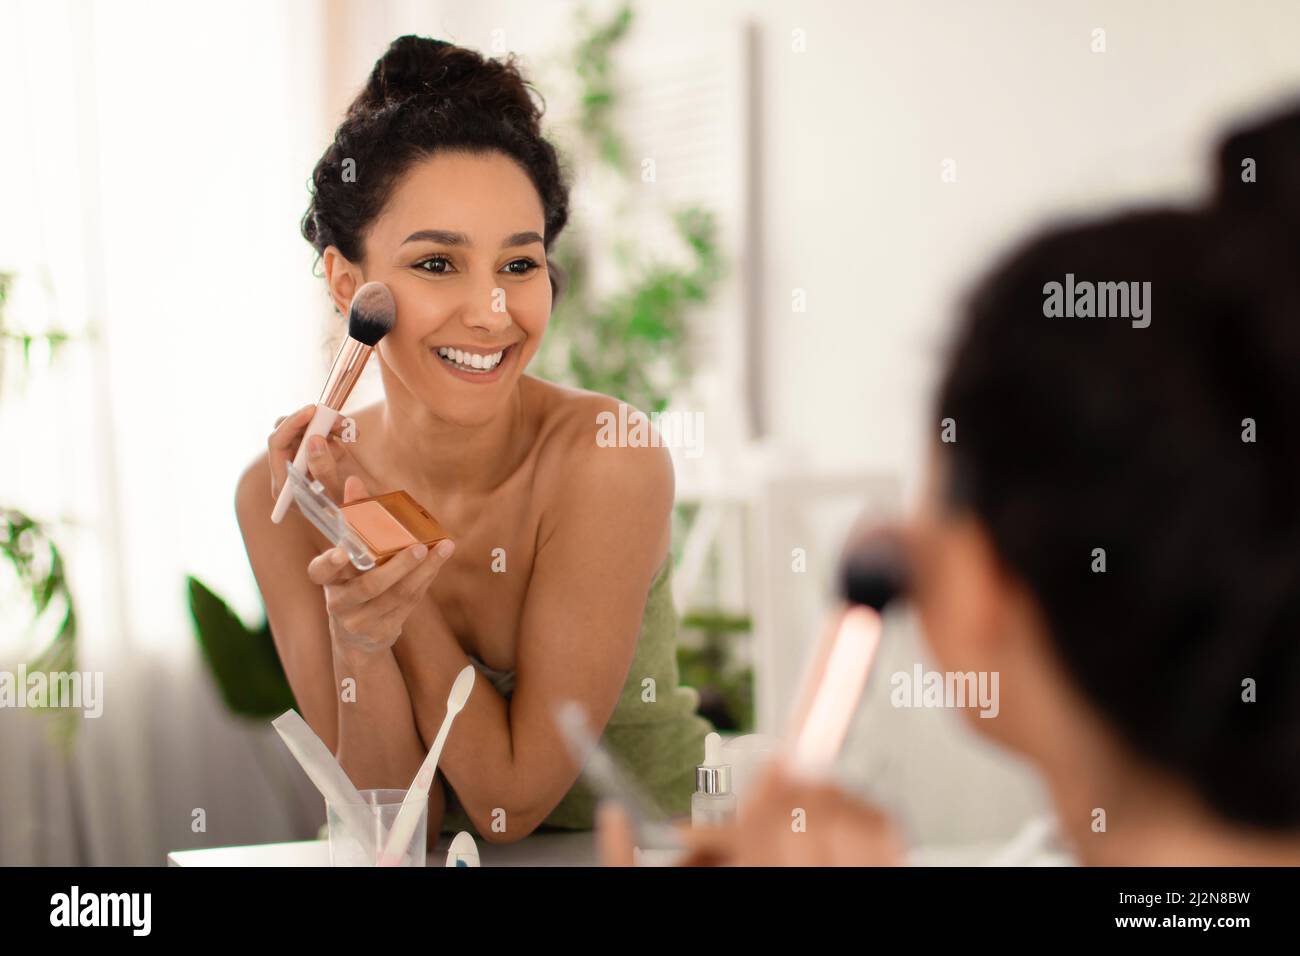 Sexy girl making makeup in bathroom. Woman take care about look. Looking  into a mirror. sexy female booty in luxury bathroom фотография Stock